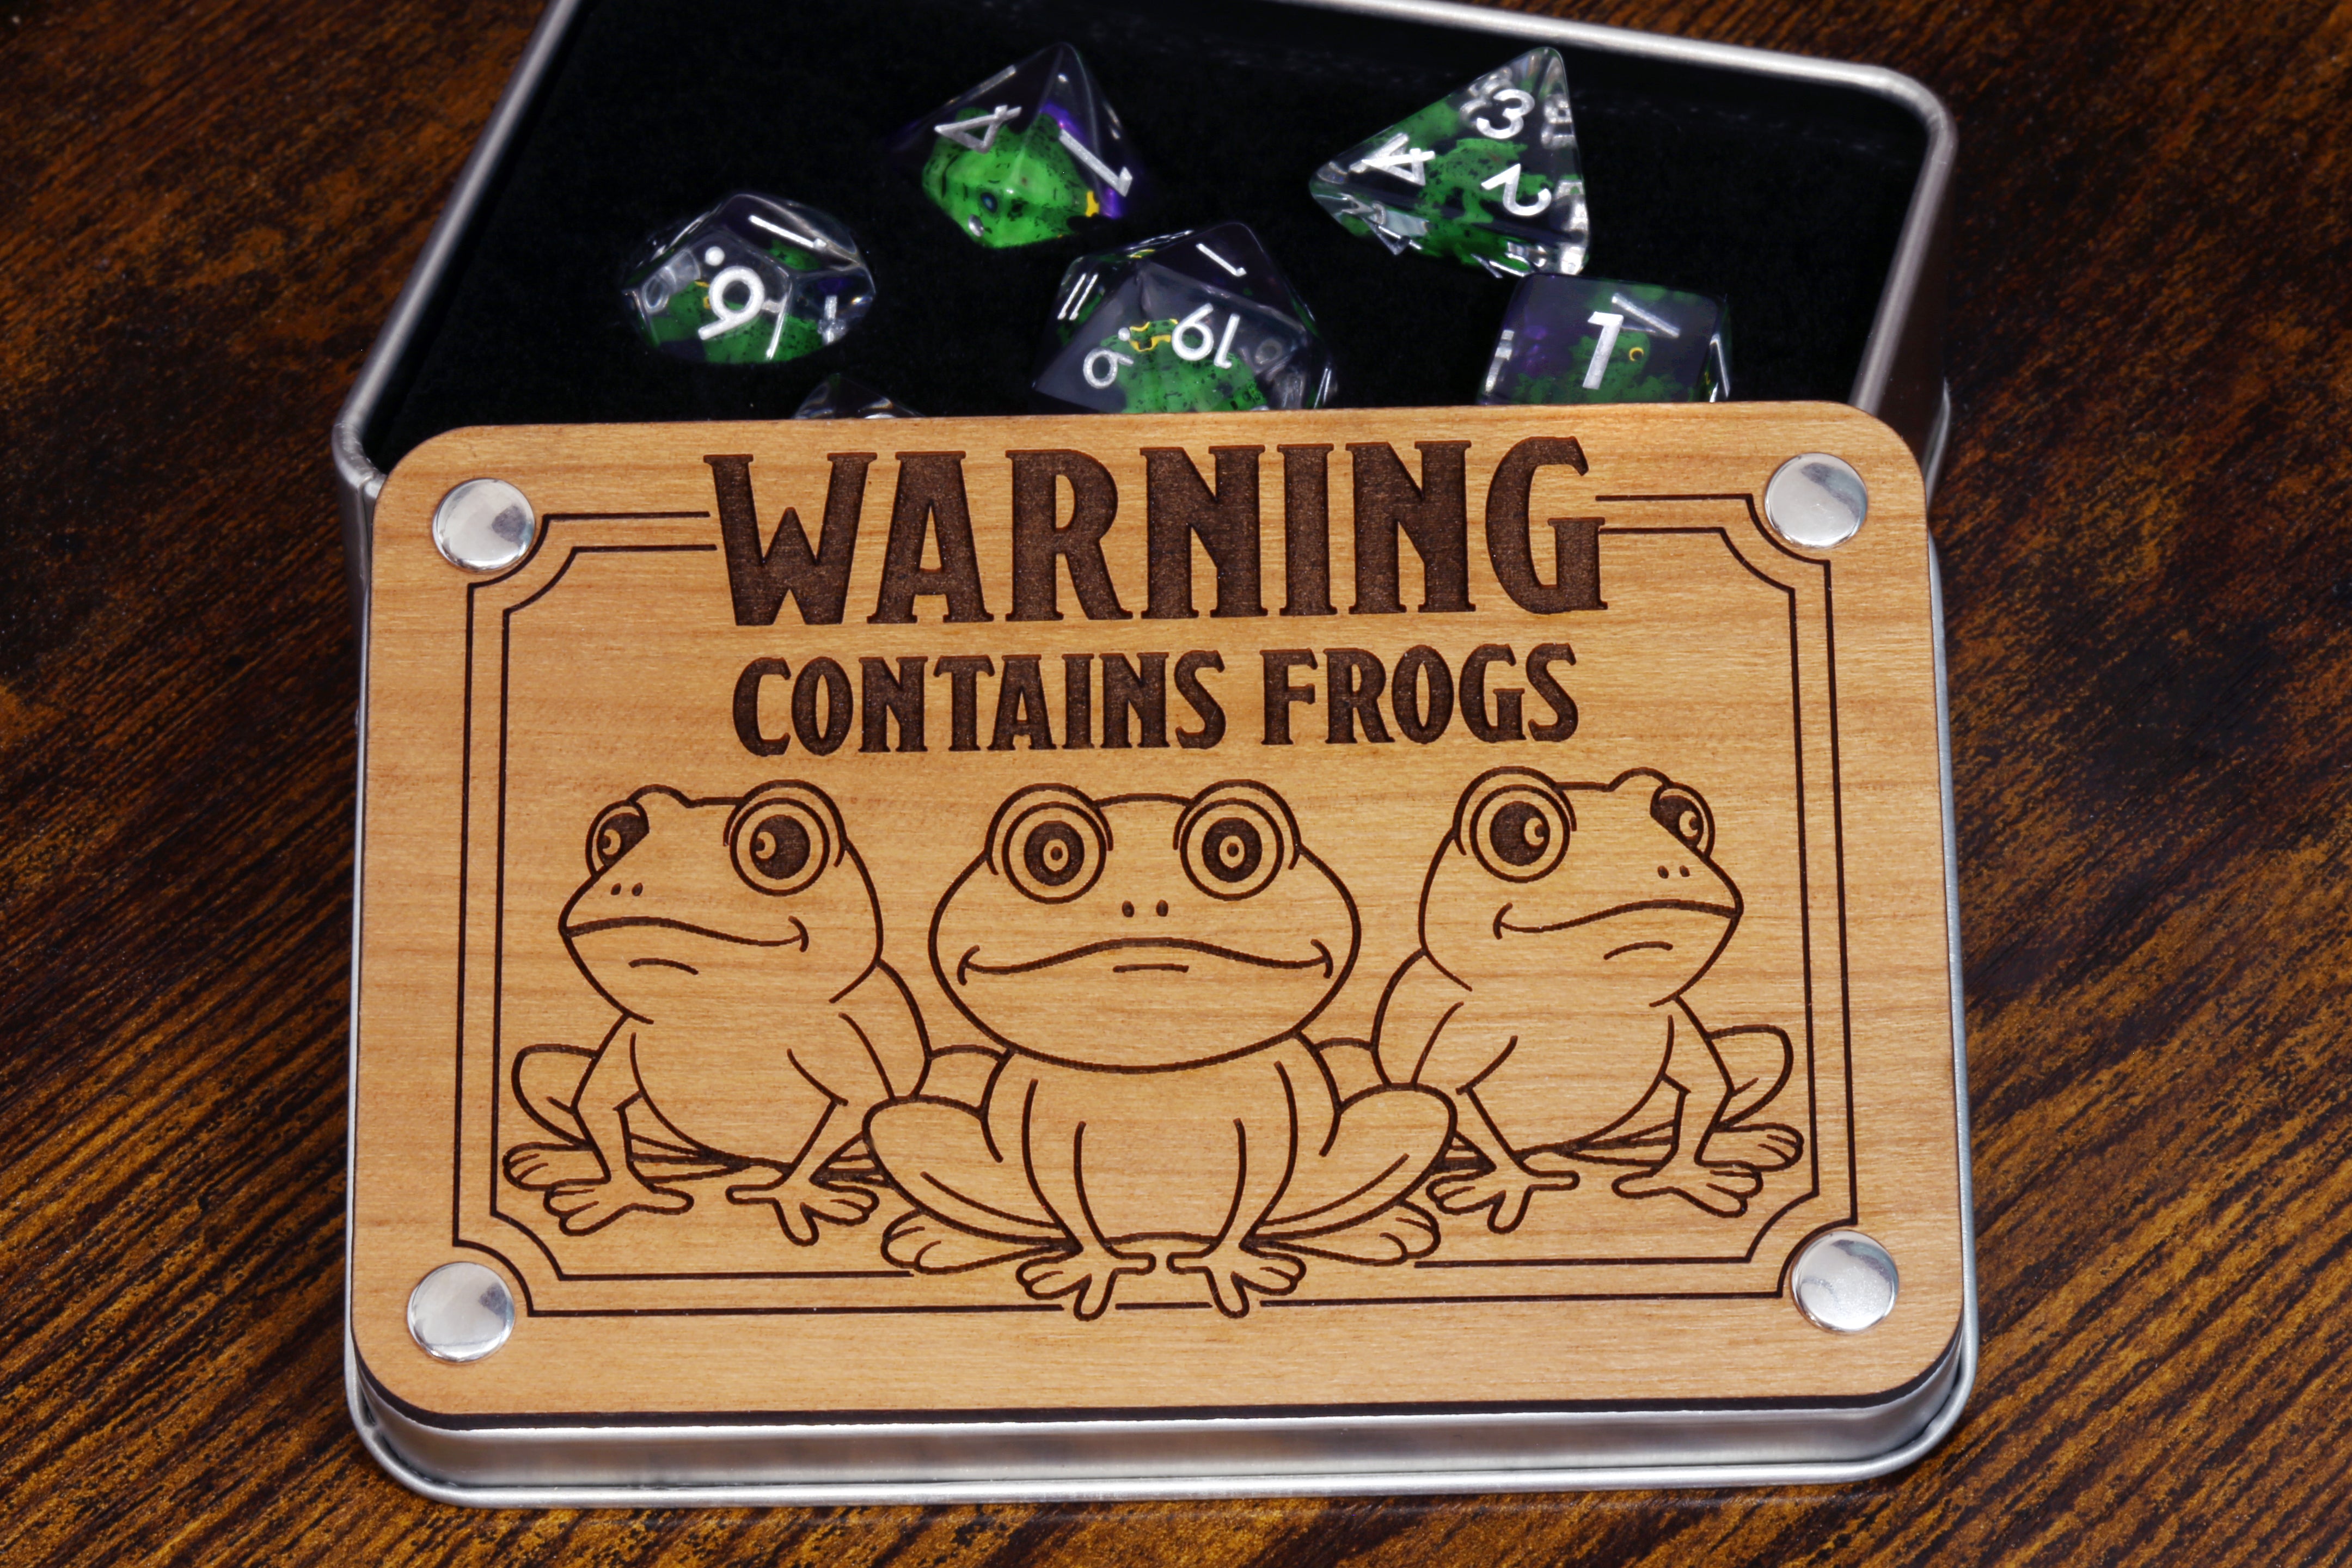 Warning ! Contains frogs dice set with metal box